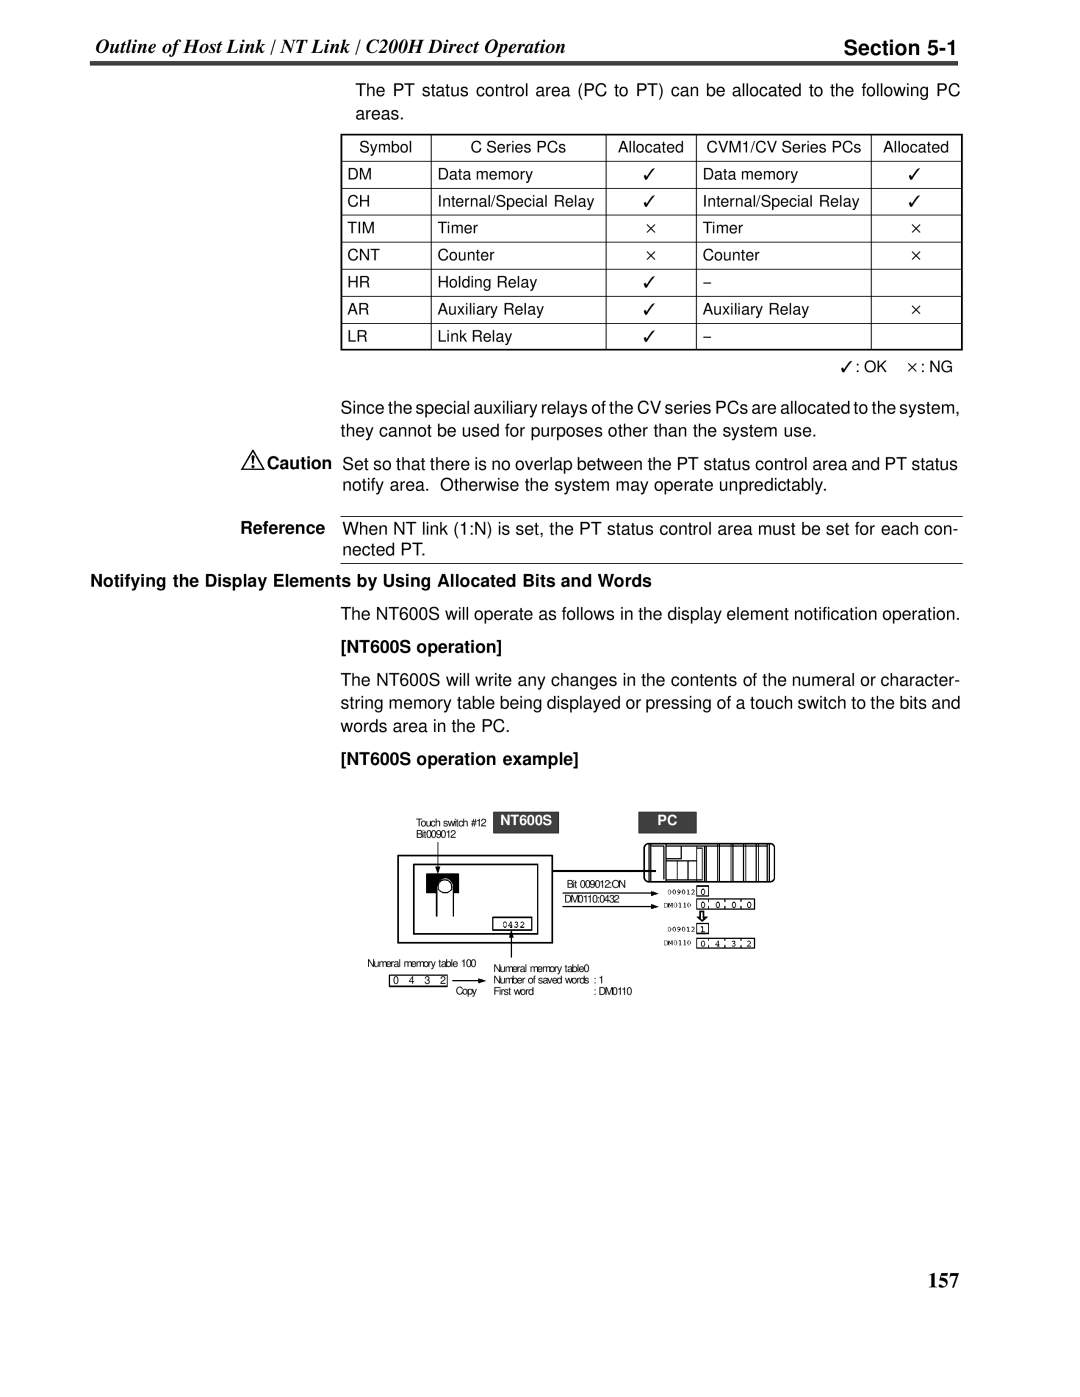 Omron V022-E3-1 operation manual Section, Reference, NT600S operation example 